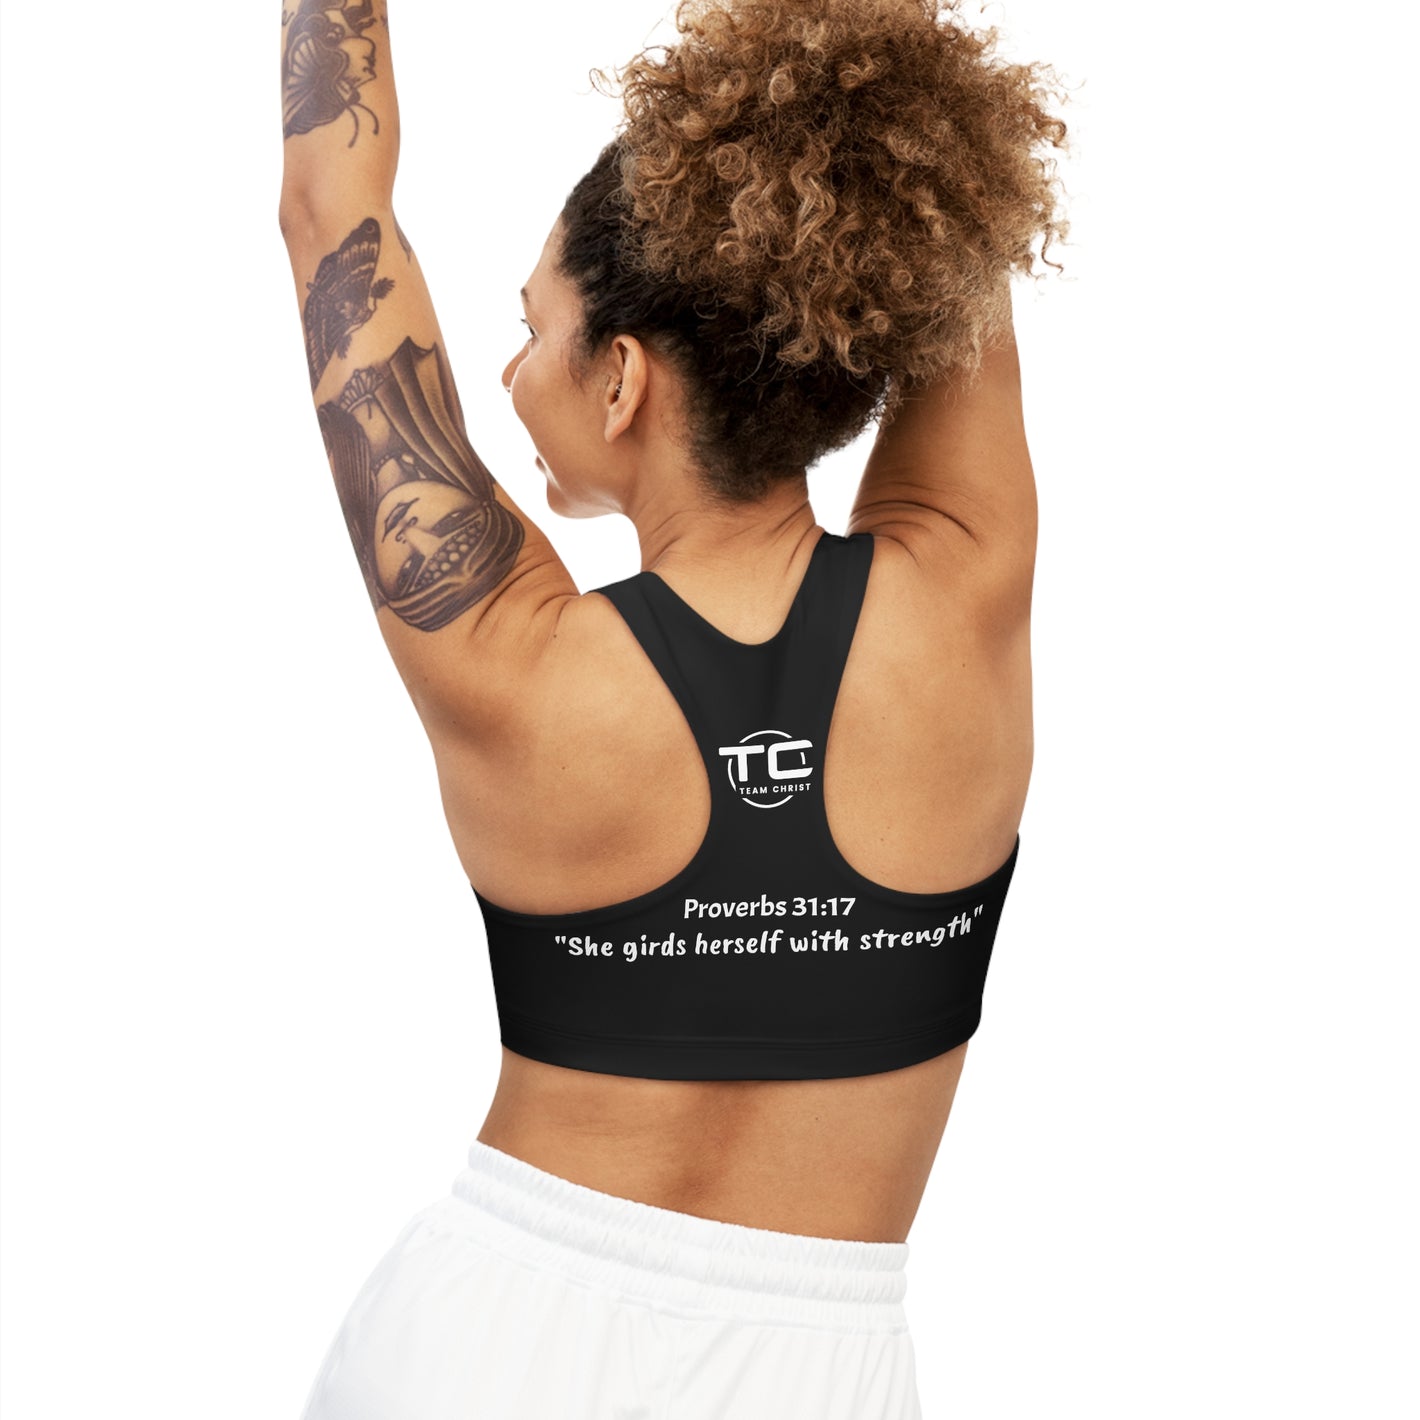 Christian black sports bra with Team Christ Logo. Proverbs 31:17 "She girds herself with strength".